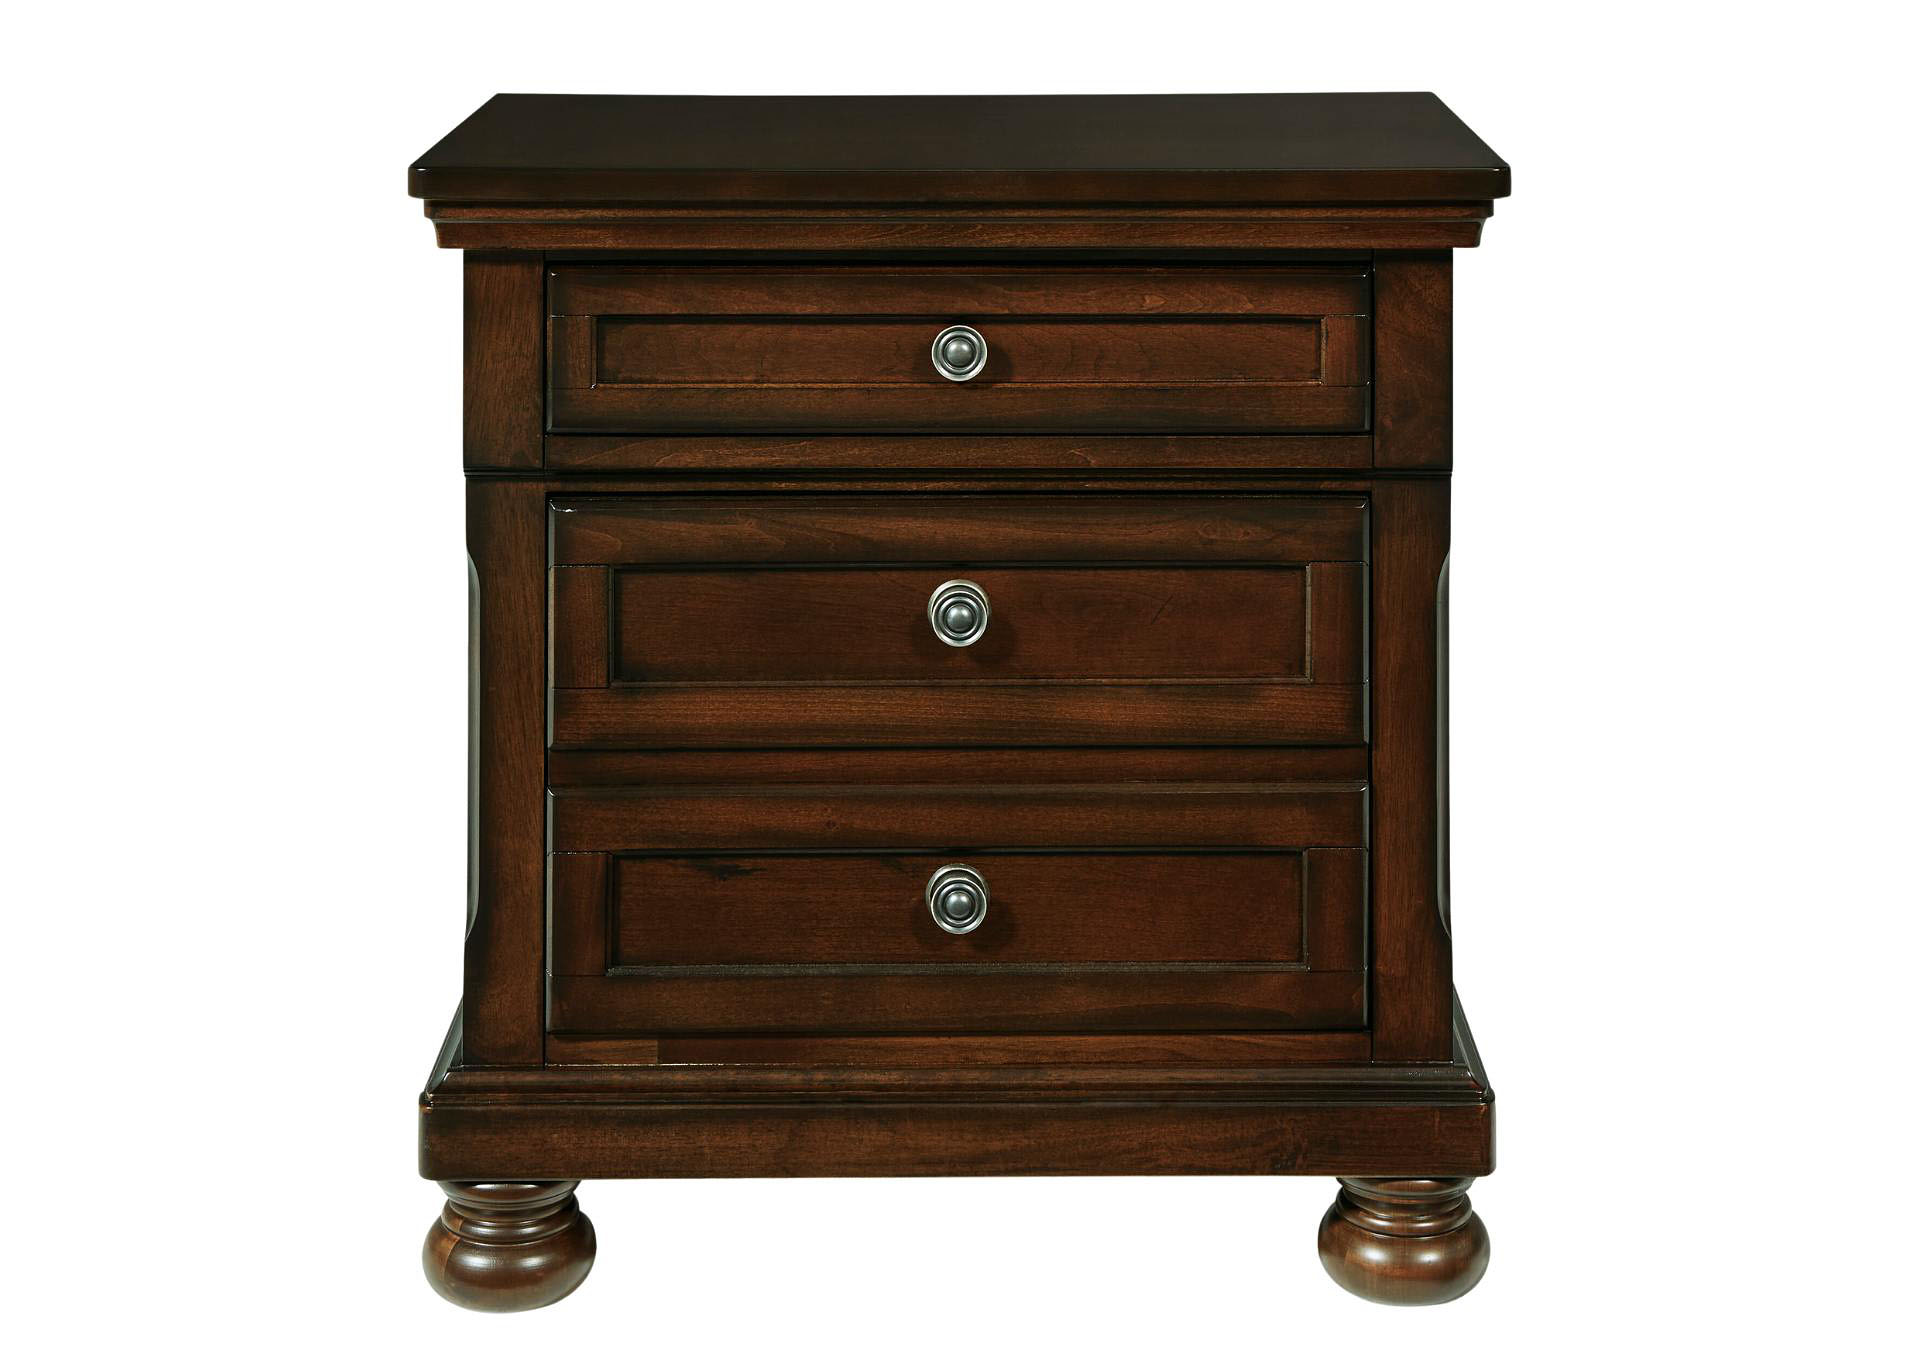 PORTER TWO DRAWER NIGHT STAND,ASHLEY FURNITURE INC.